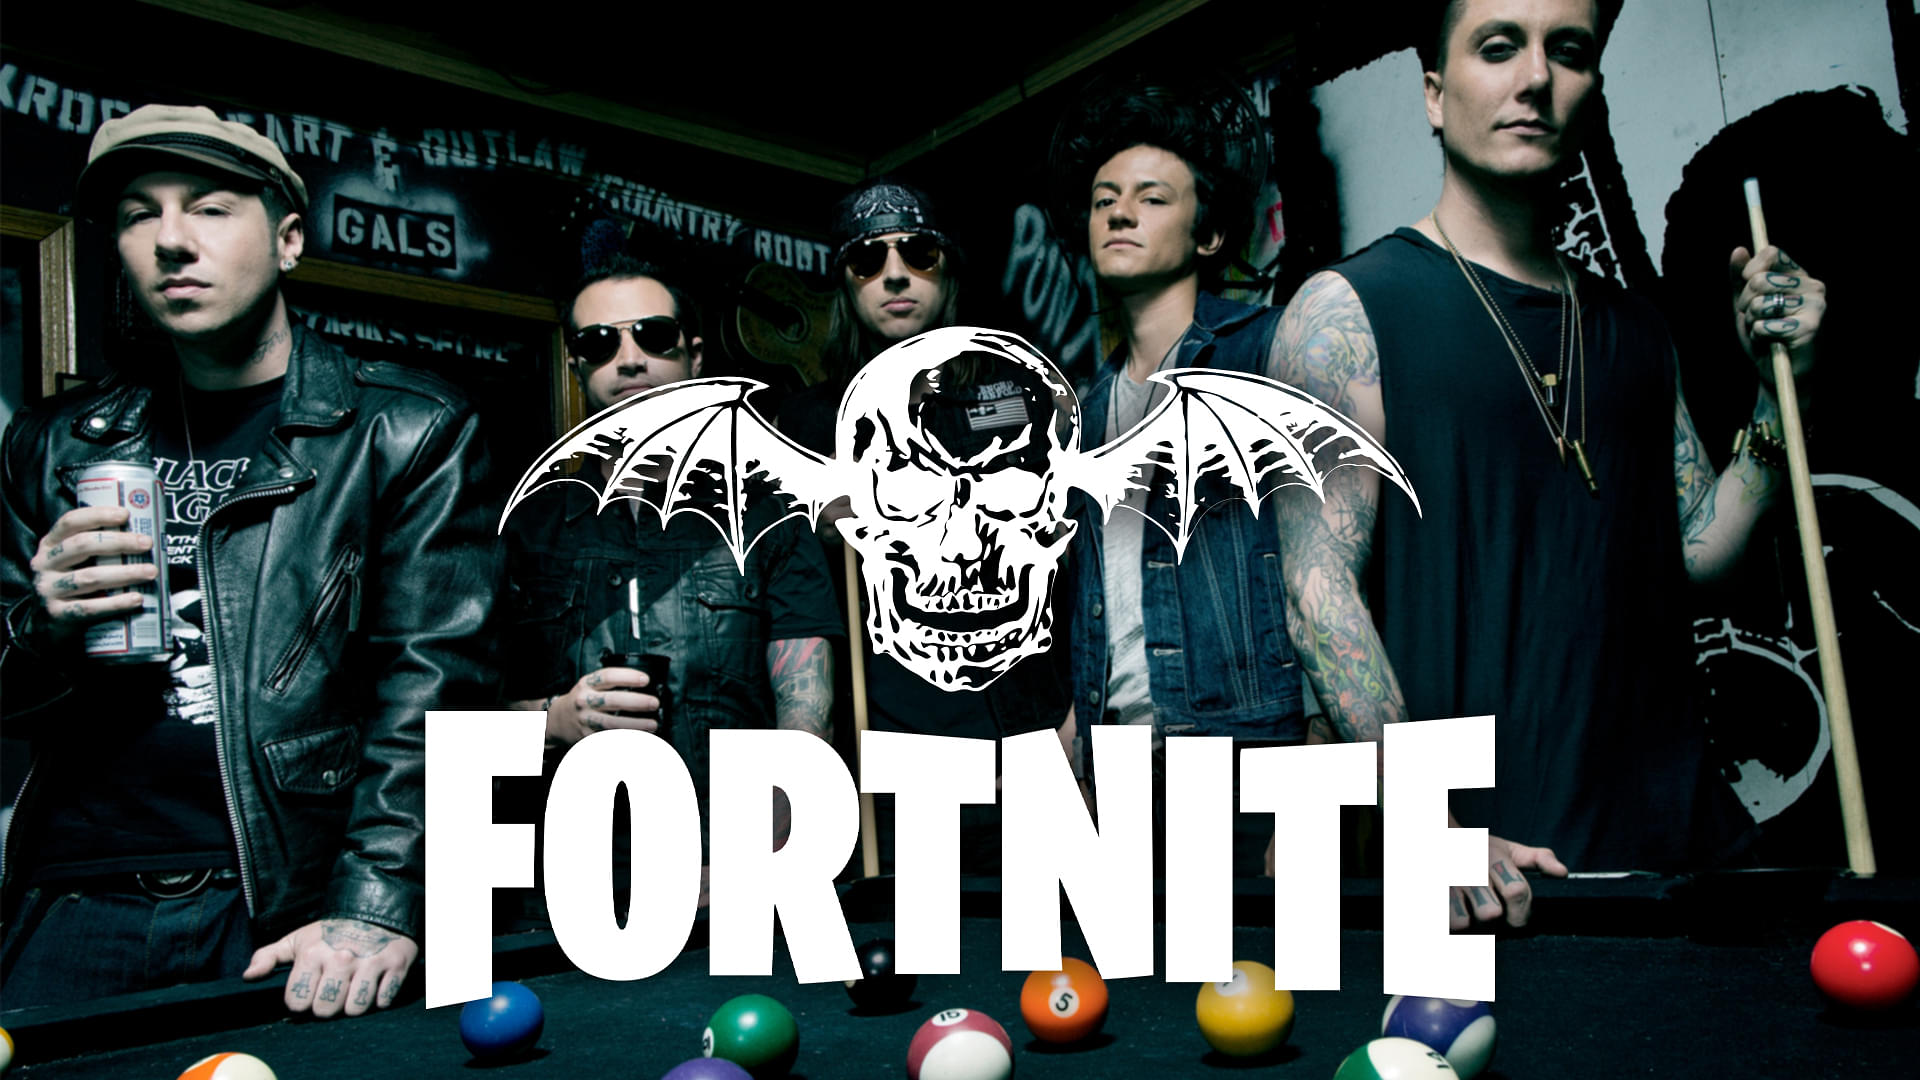 An image showing Avenged Sevenfold band members, logo and Fornite logo